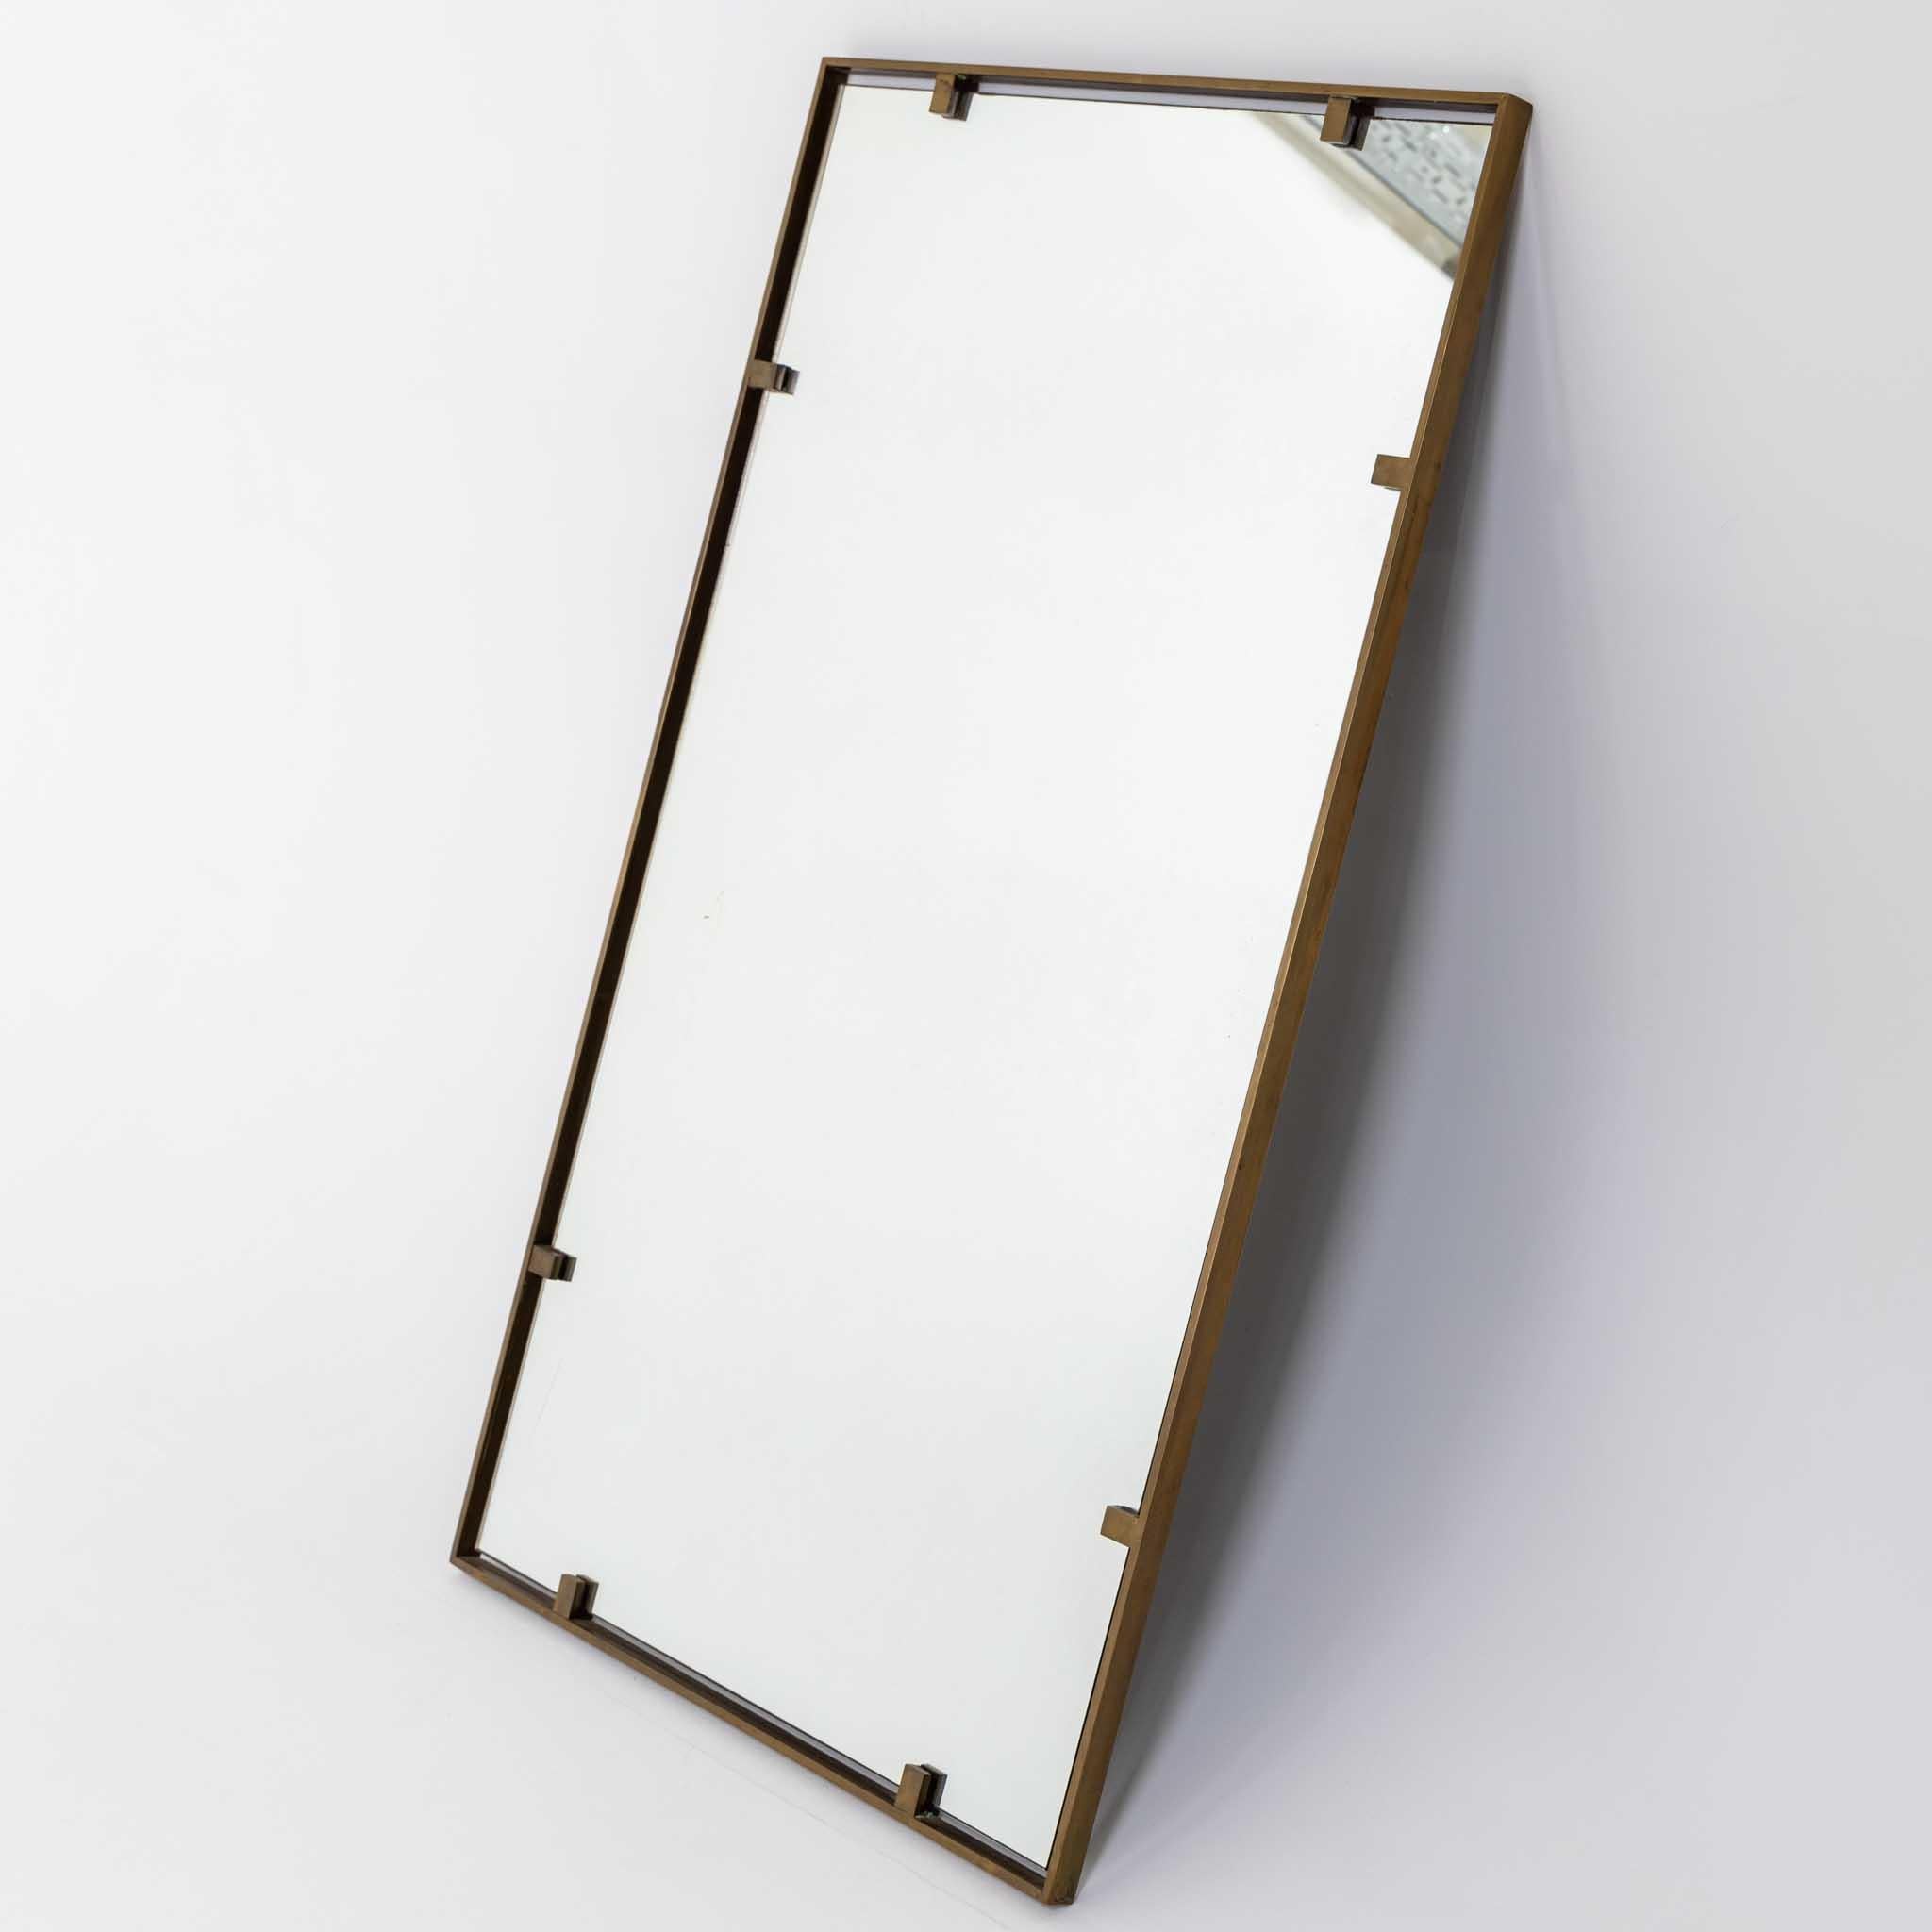 Decorative Italian Modernist rectangular mirror.

Solid patinated brass frame with original mirror glass. 

The mirror is attached with brackets to give a floating effect.